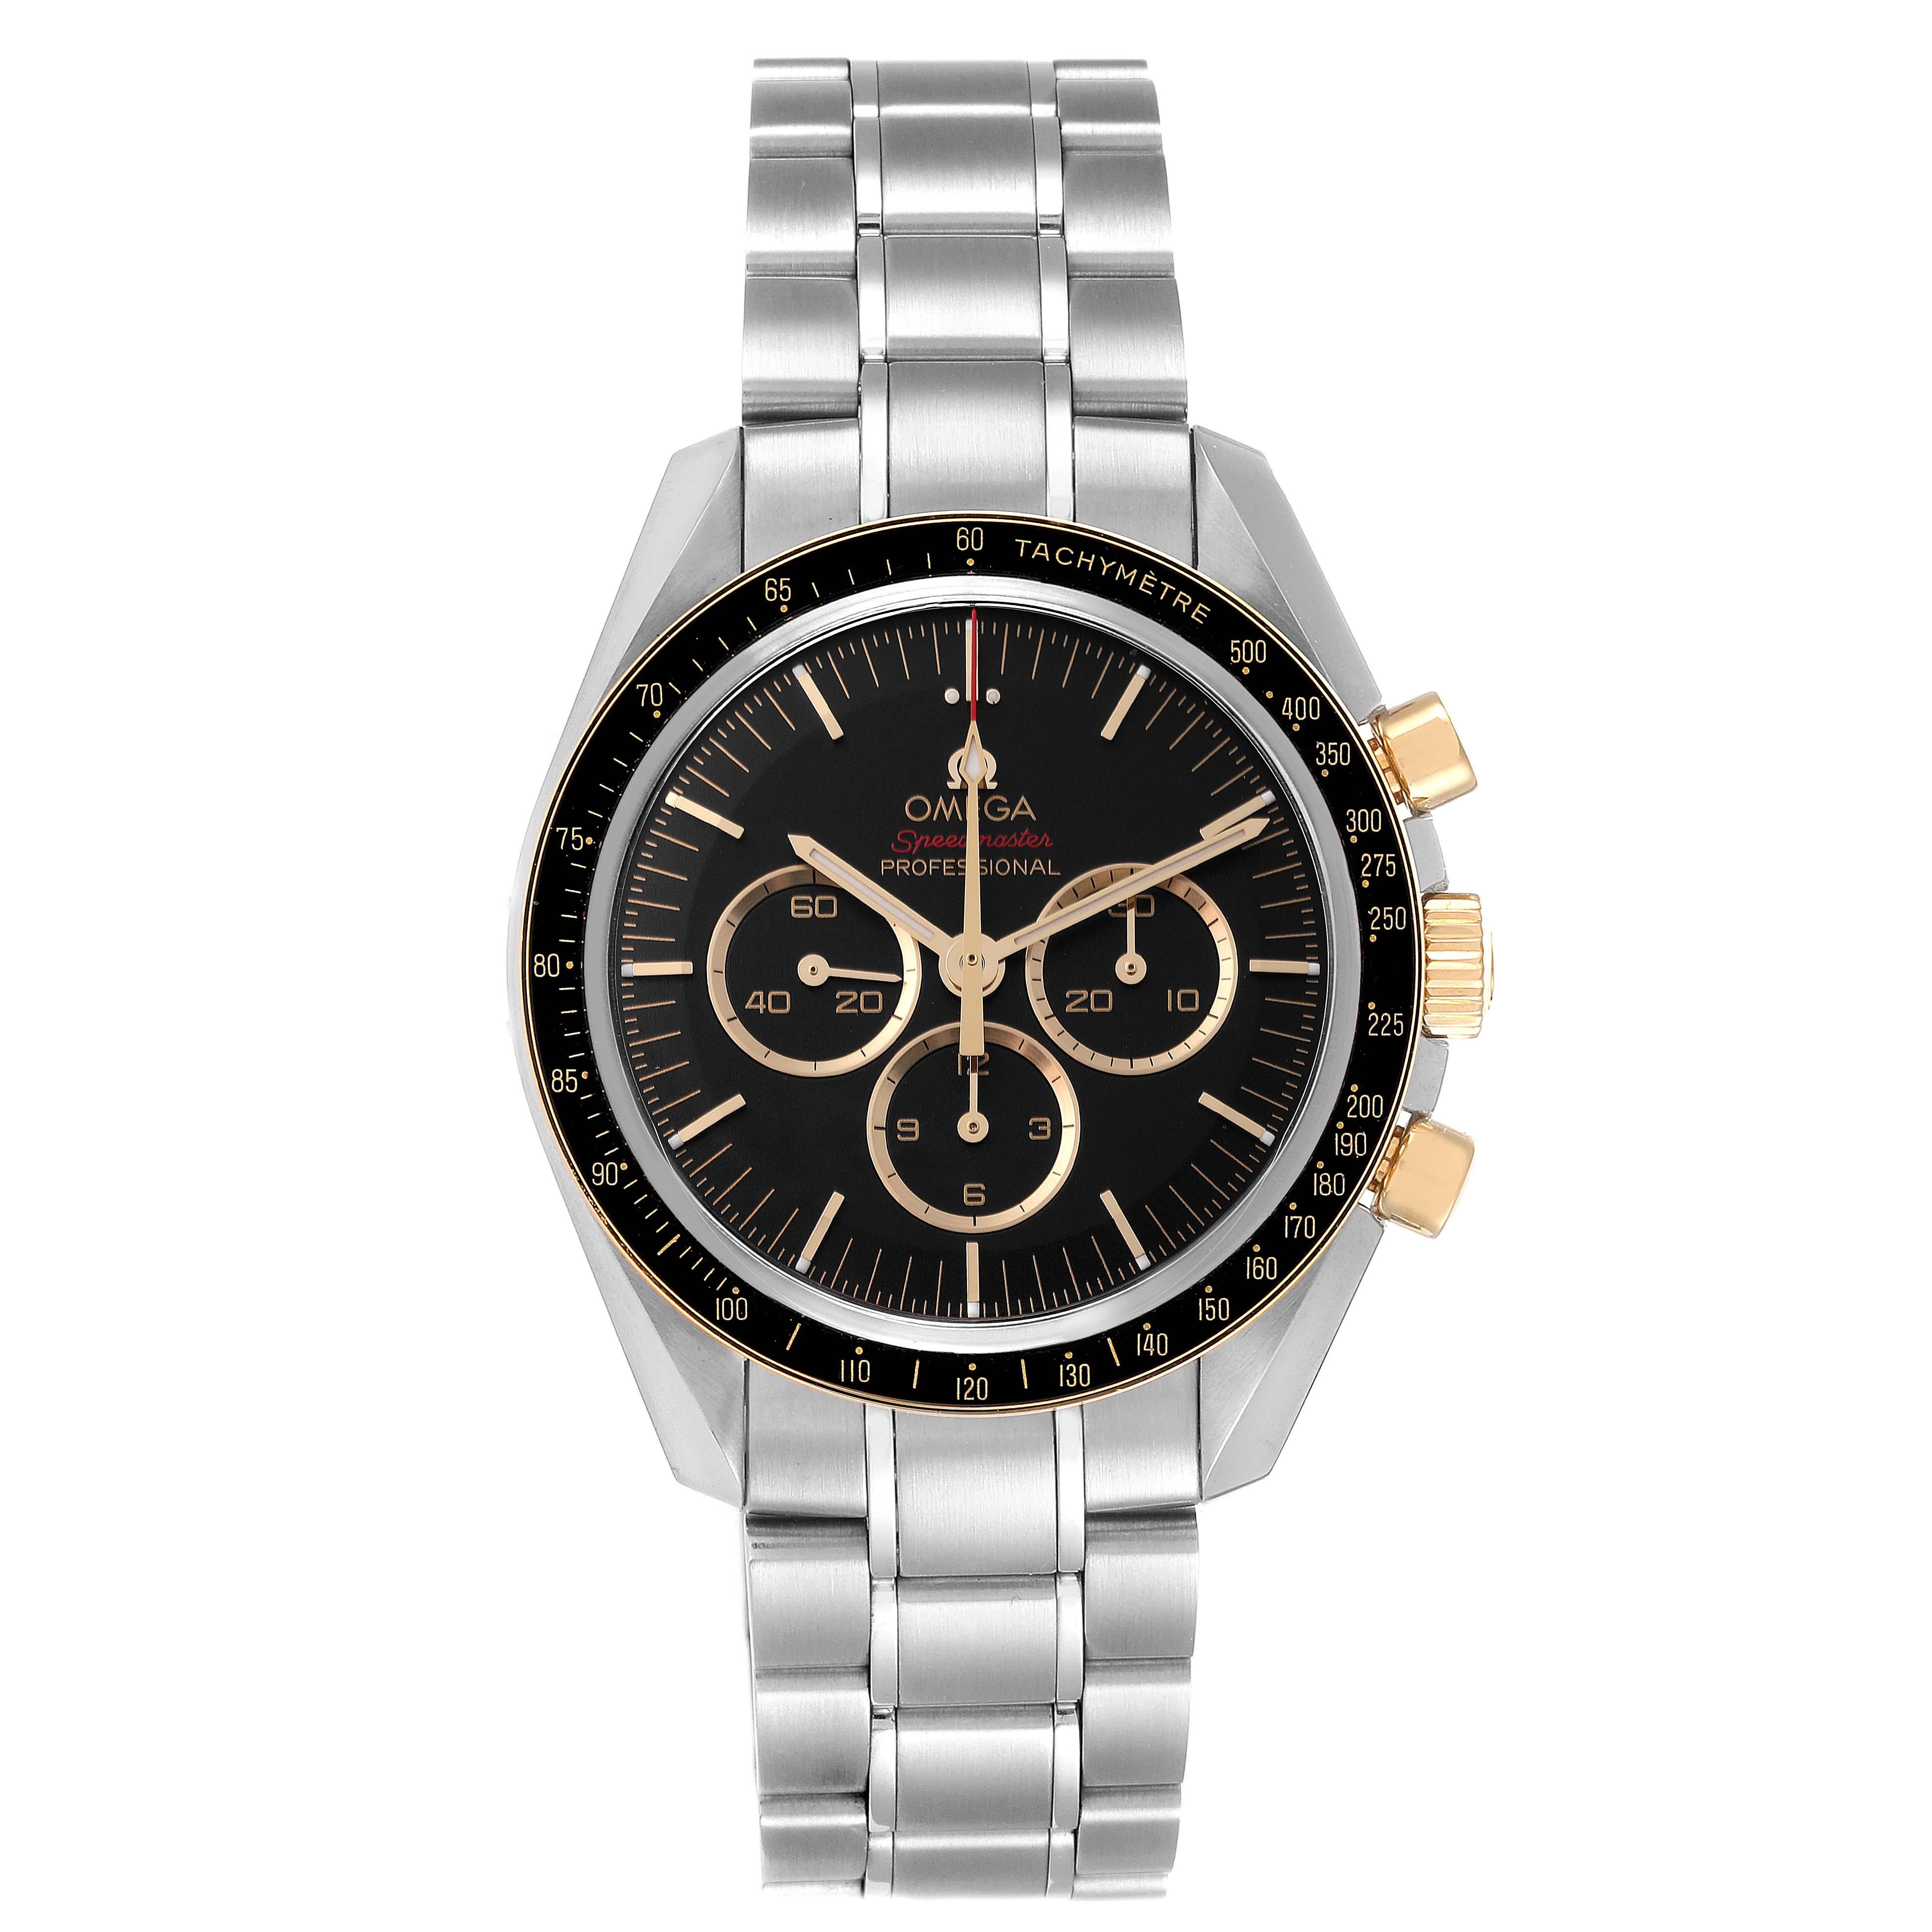 Omega Speedmaster Tokyo 2020 Limited Edition Steel Mens Watch 522.20.42.30.01.001 Box Card. Manual winding chronograph movement. Stainless steel round case 42.0 mm in diameter. 18k yellow gold bezel with black aluminum tachymeter insert. Scratch